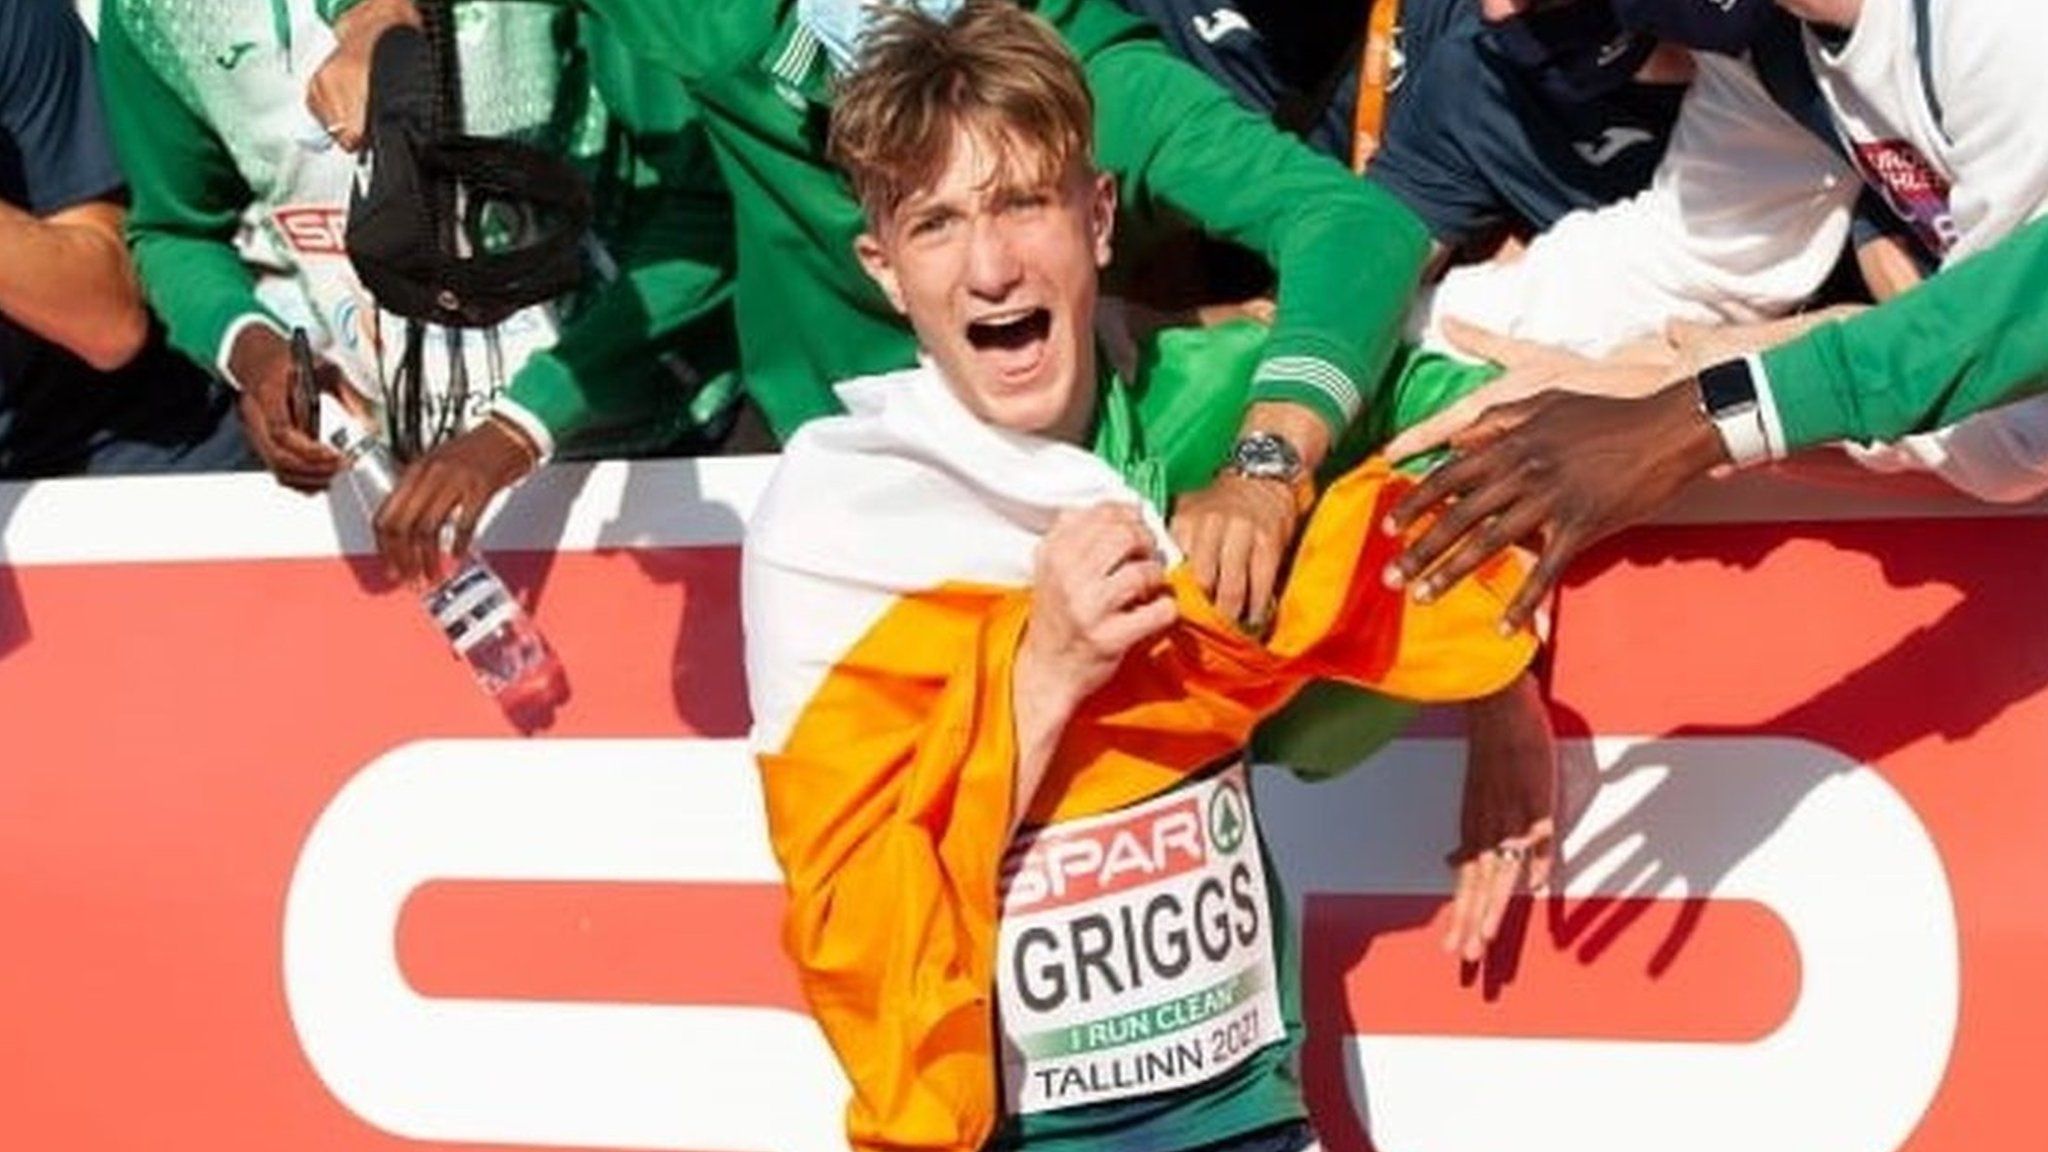 Nick Griggs celebrates after his surprise 3,000m gold at the European Under-20 Championships in July